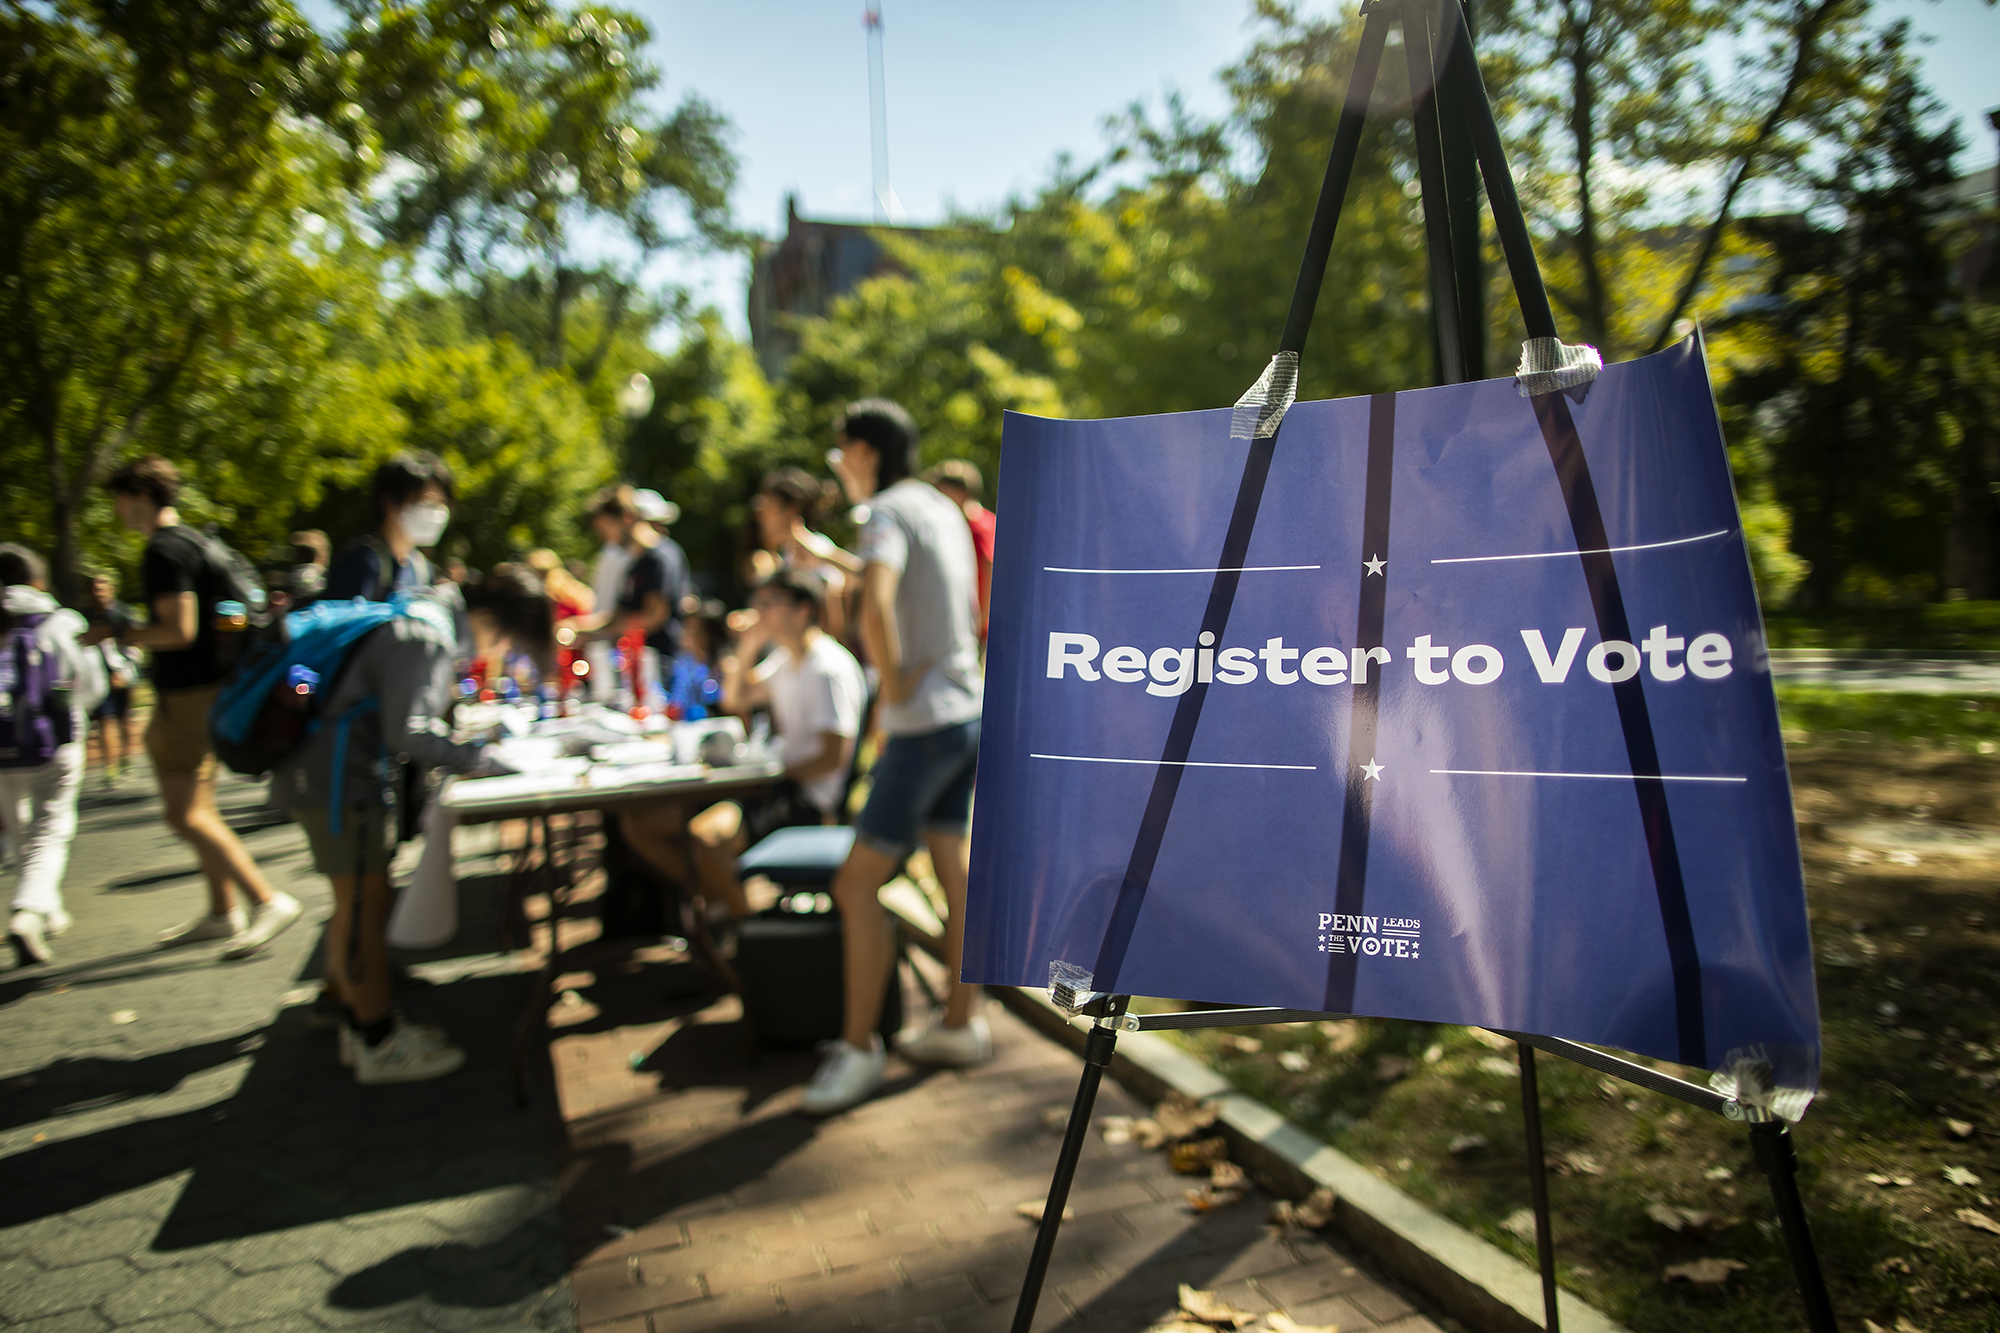 A sign on Locust walk next to tables and students reads Register to Vote.